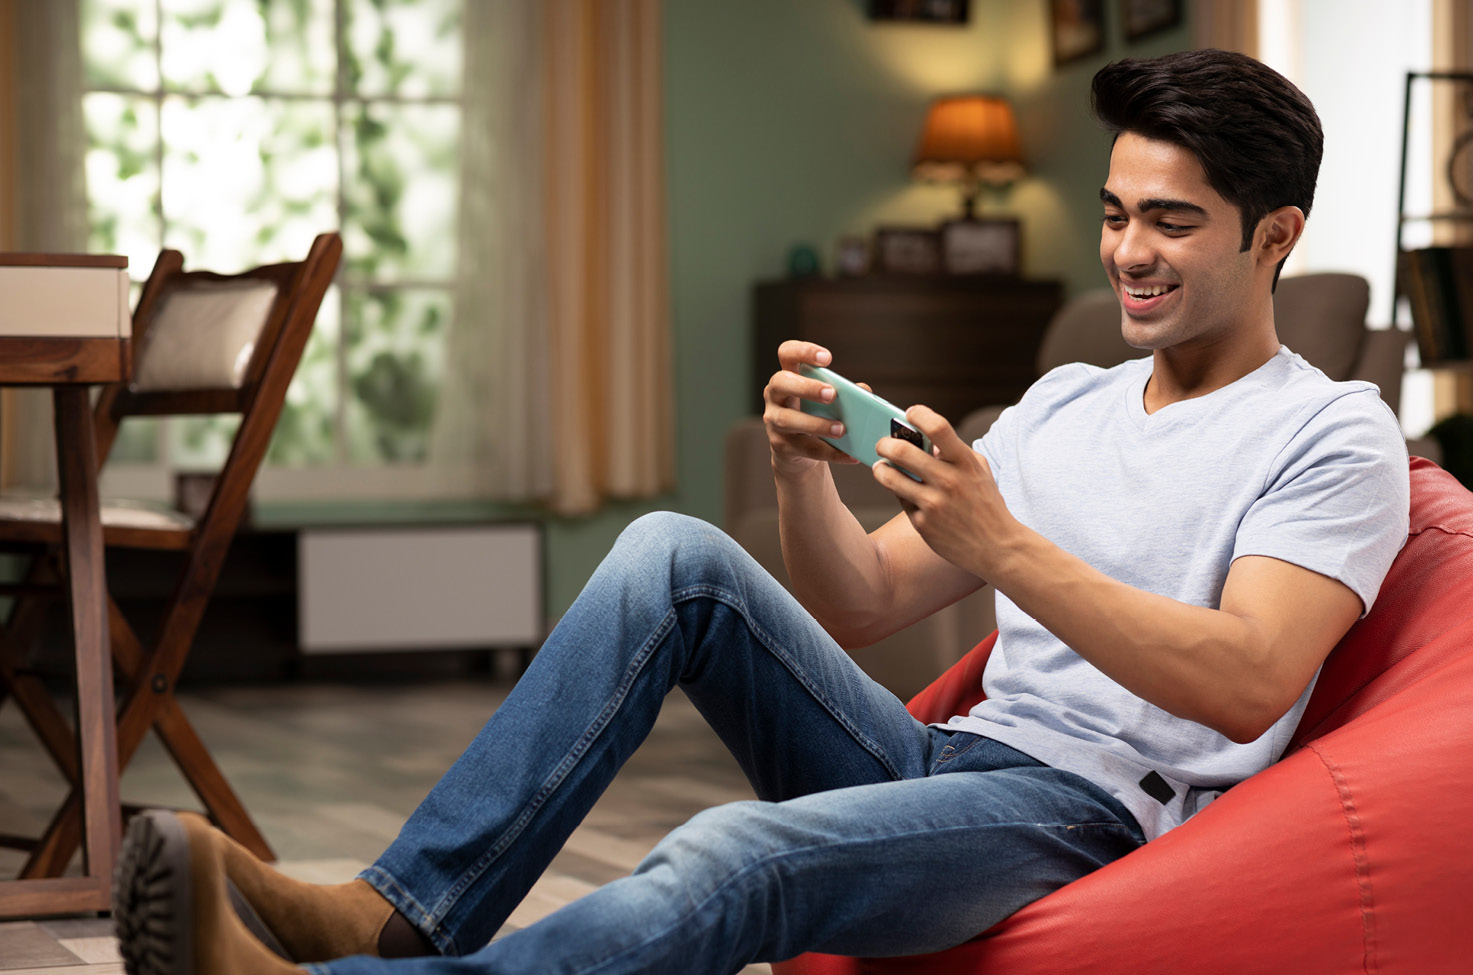 Man in white shirt sat on a beanbag and smiling as he looks at his phone